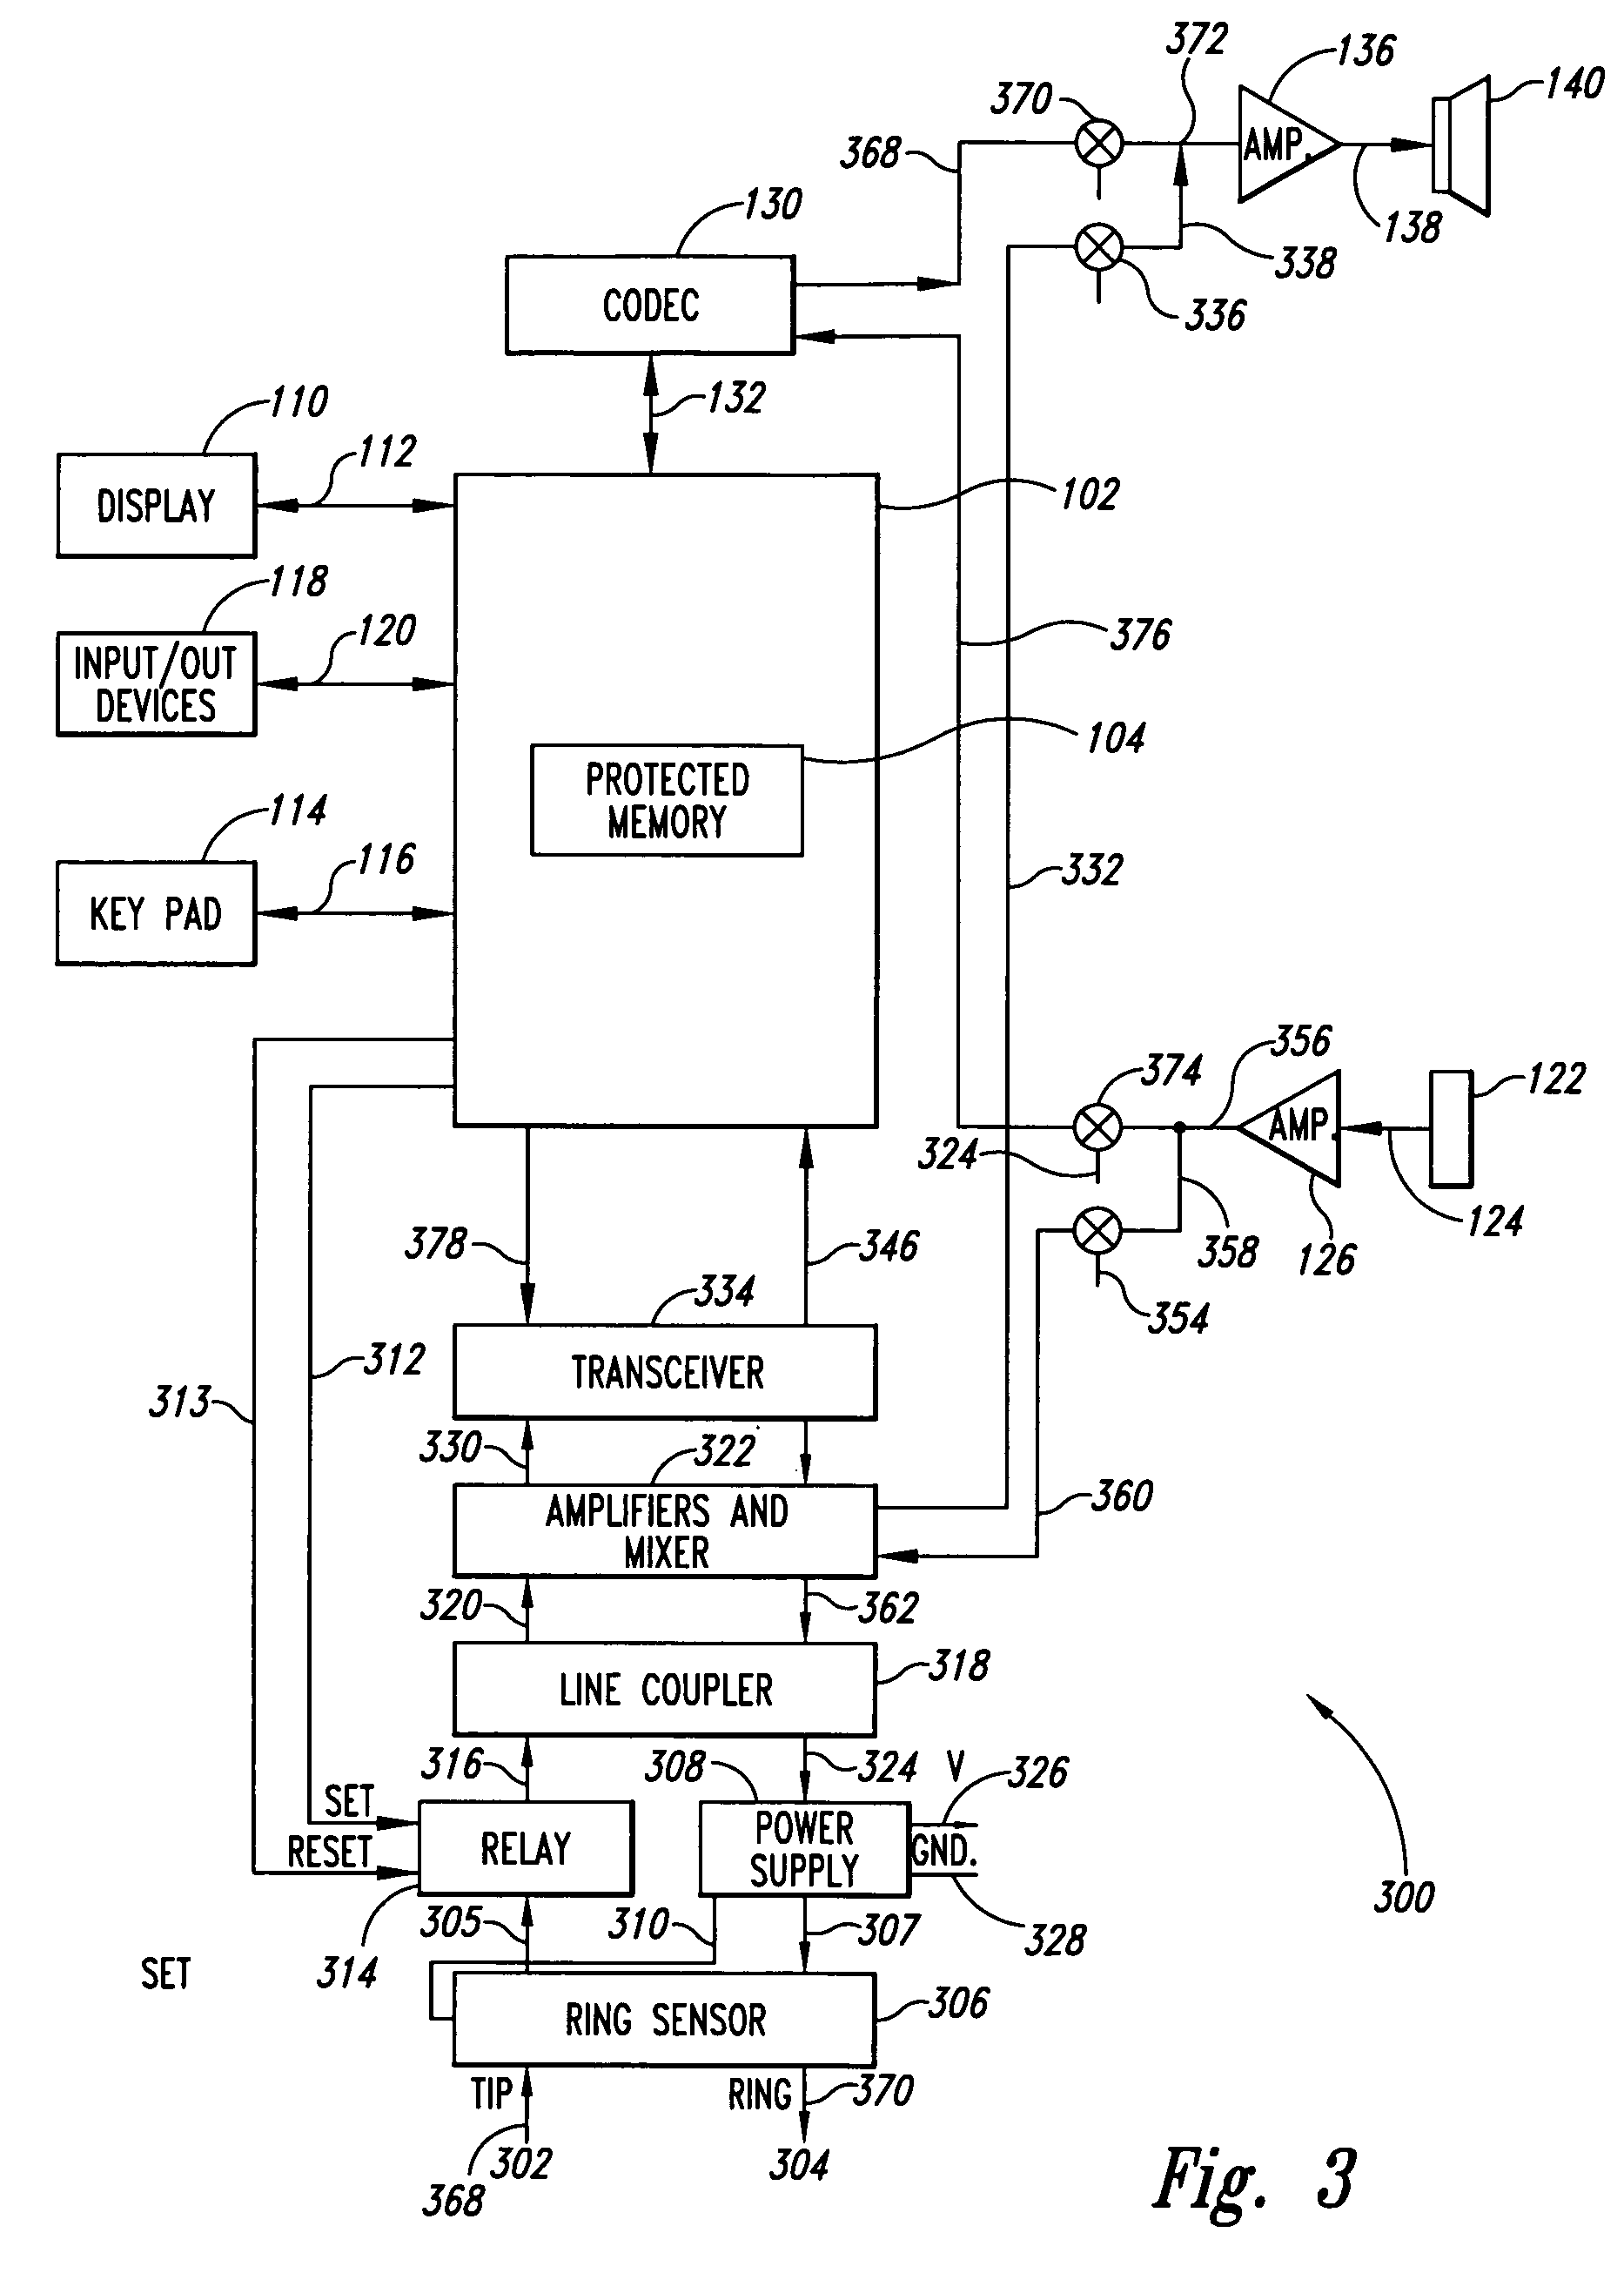 Low-power hand-held transaction device